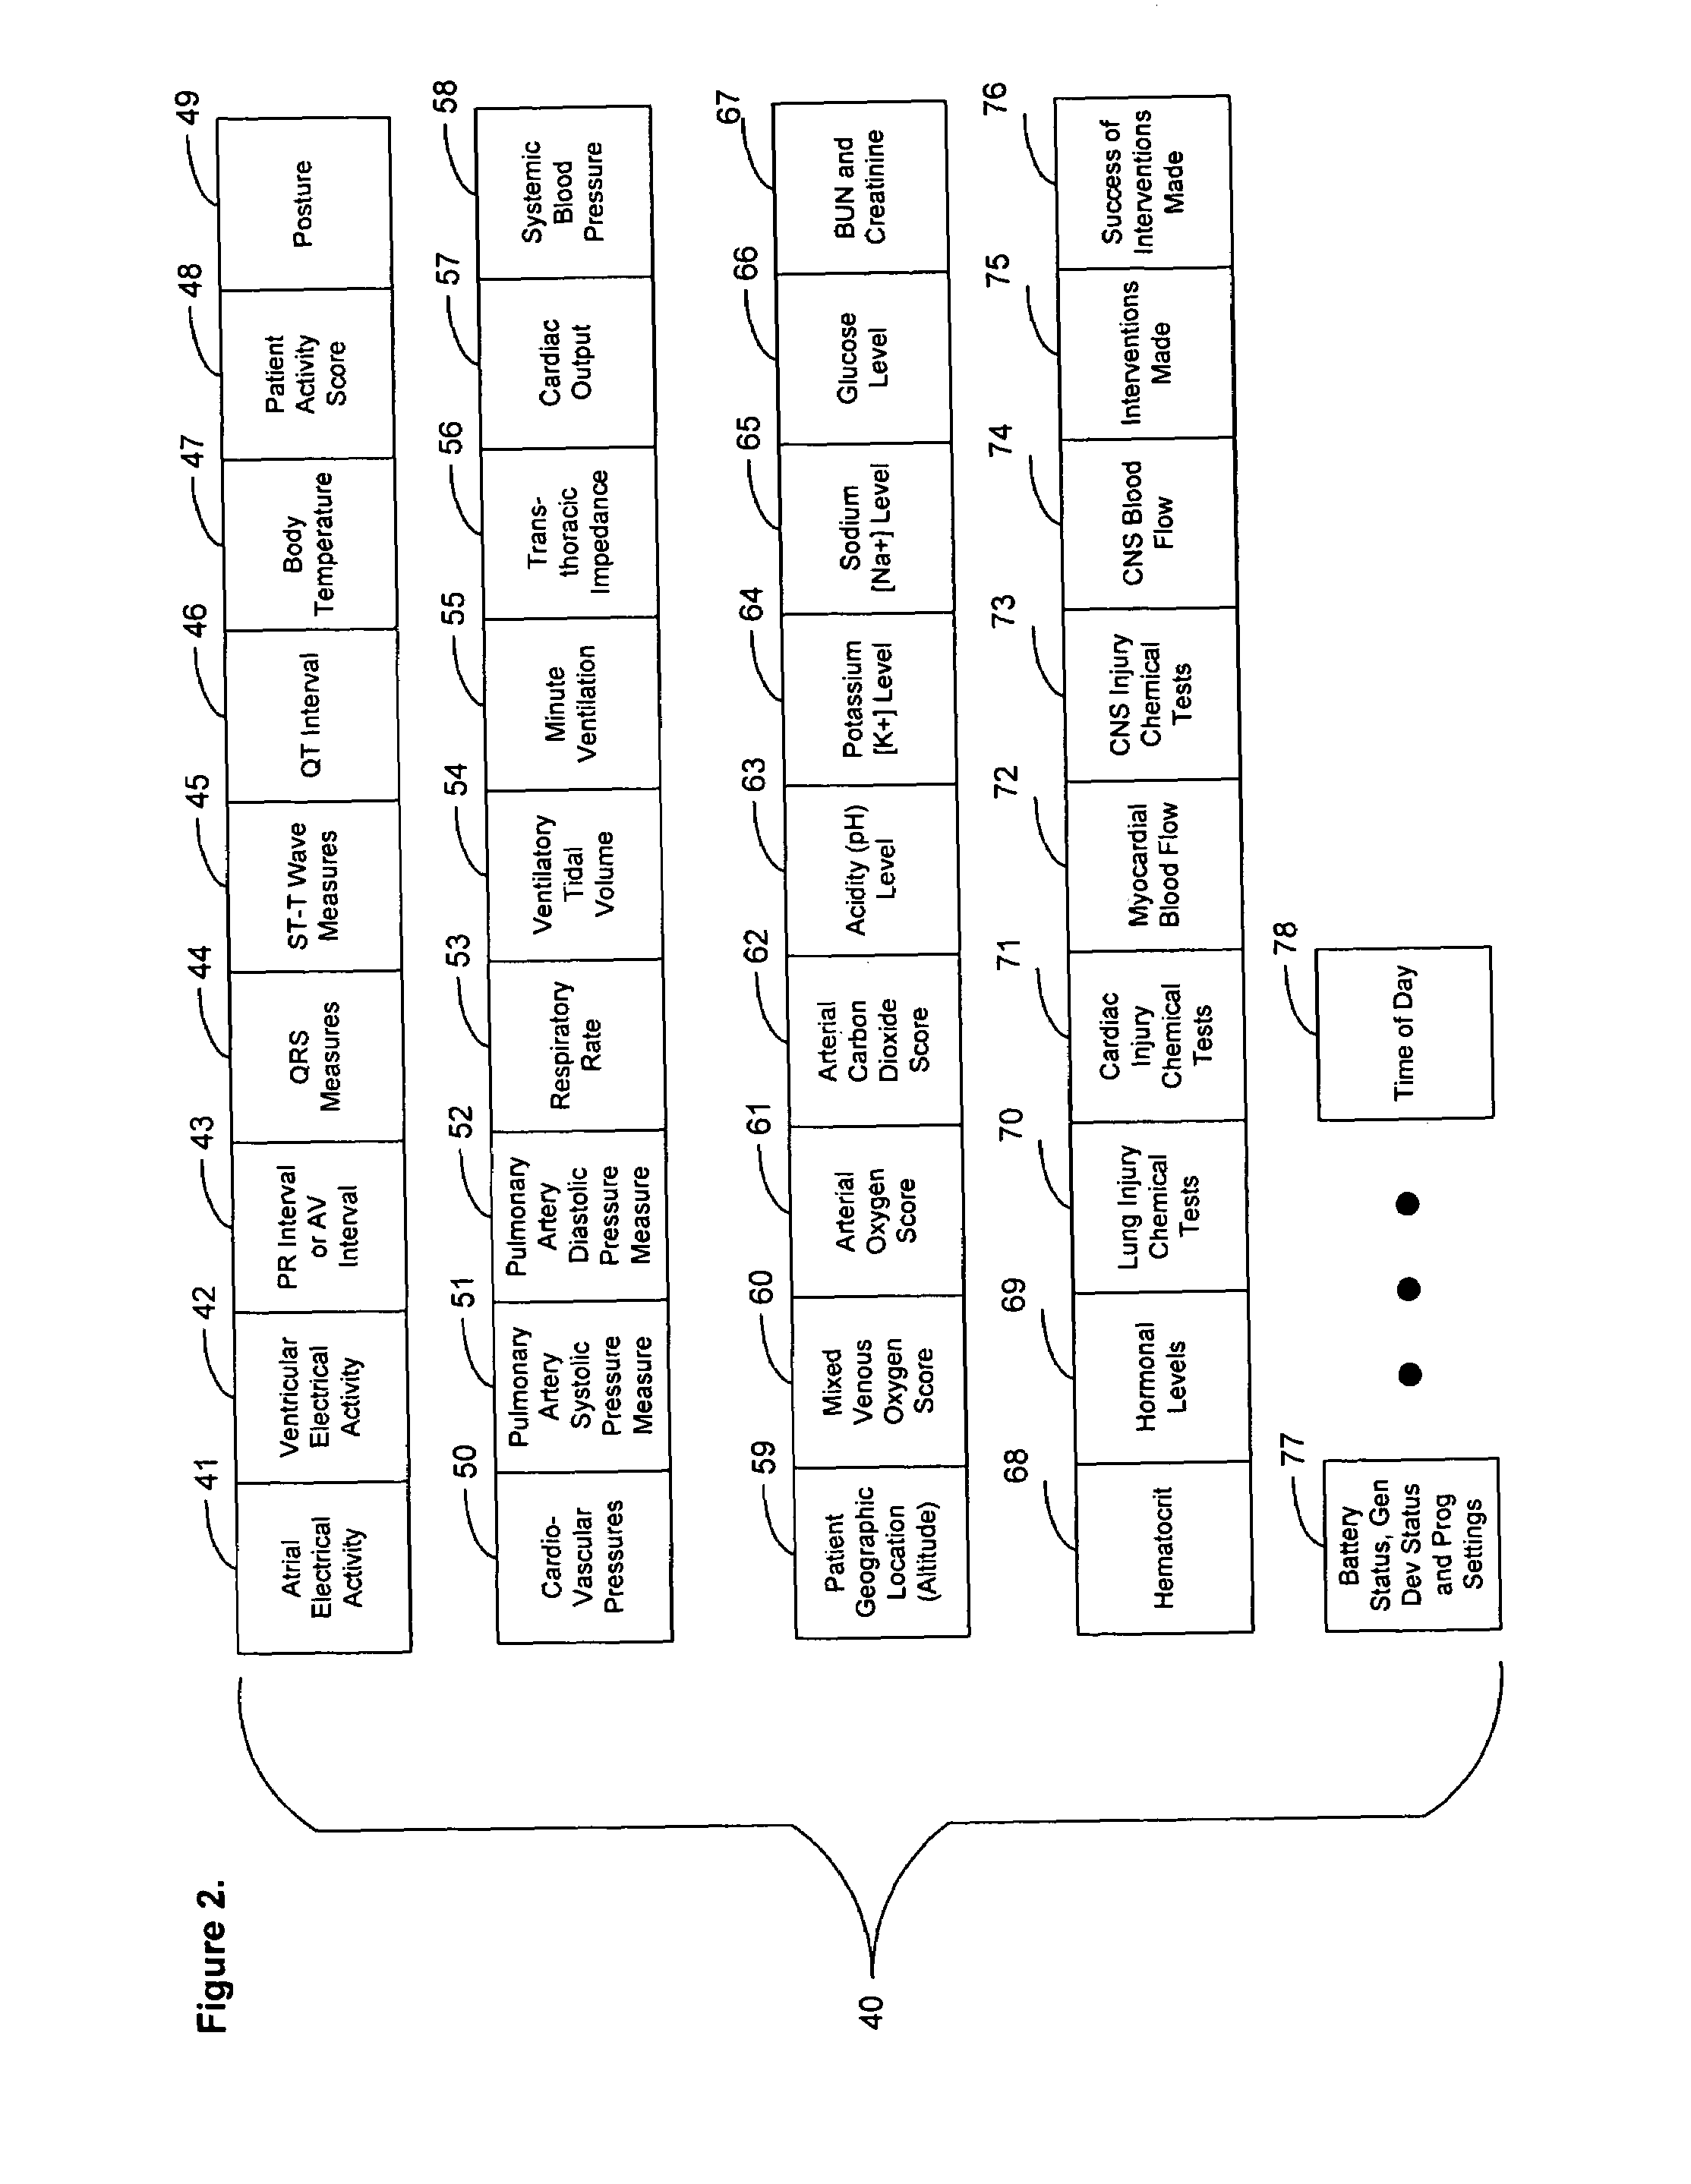 System and method for diagnosing and monitoring respiratory insufficiency for automated remote patient care